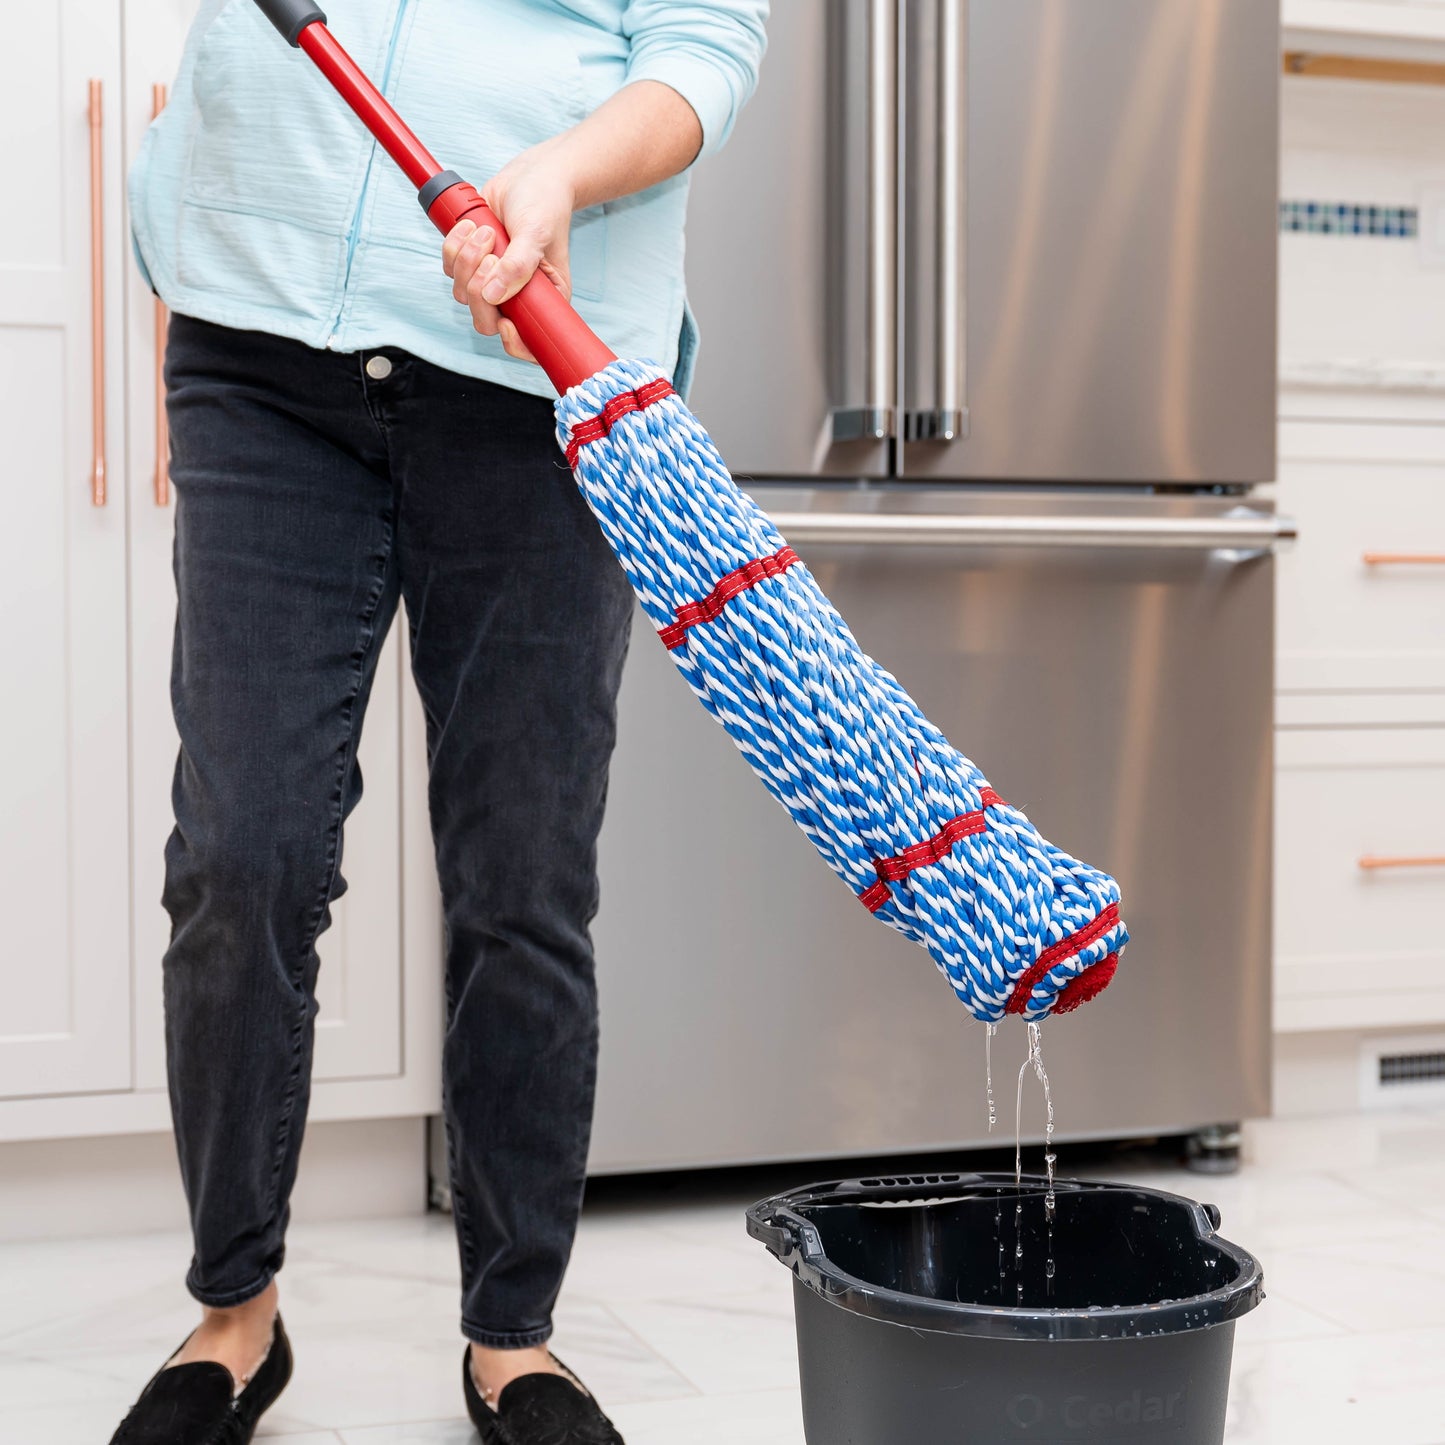 O-Cedar MicroTwist™ MAX Microfiber Mop, Removes 99% of Bacteria with Just Water